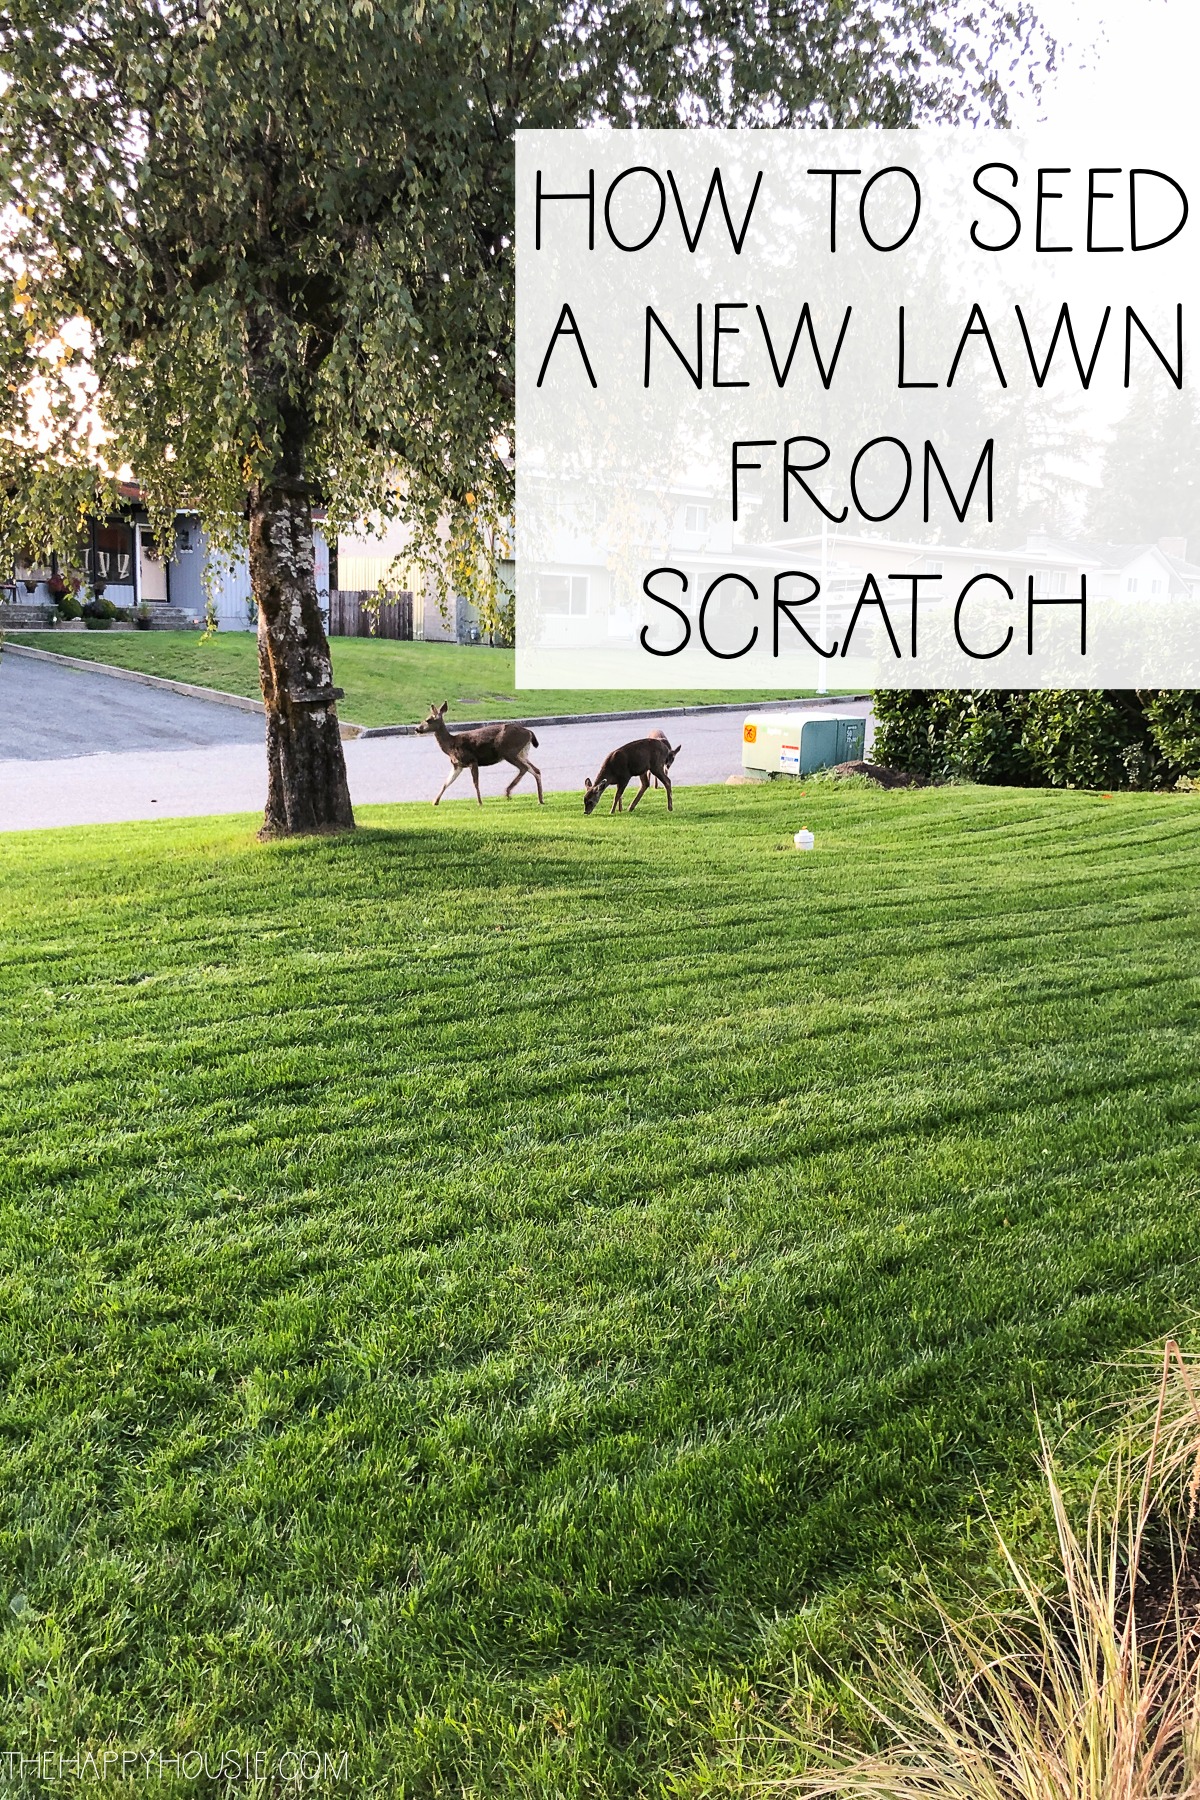 How To Seed A New Lawn From Scratch poster.